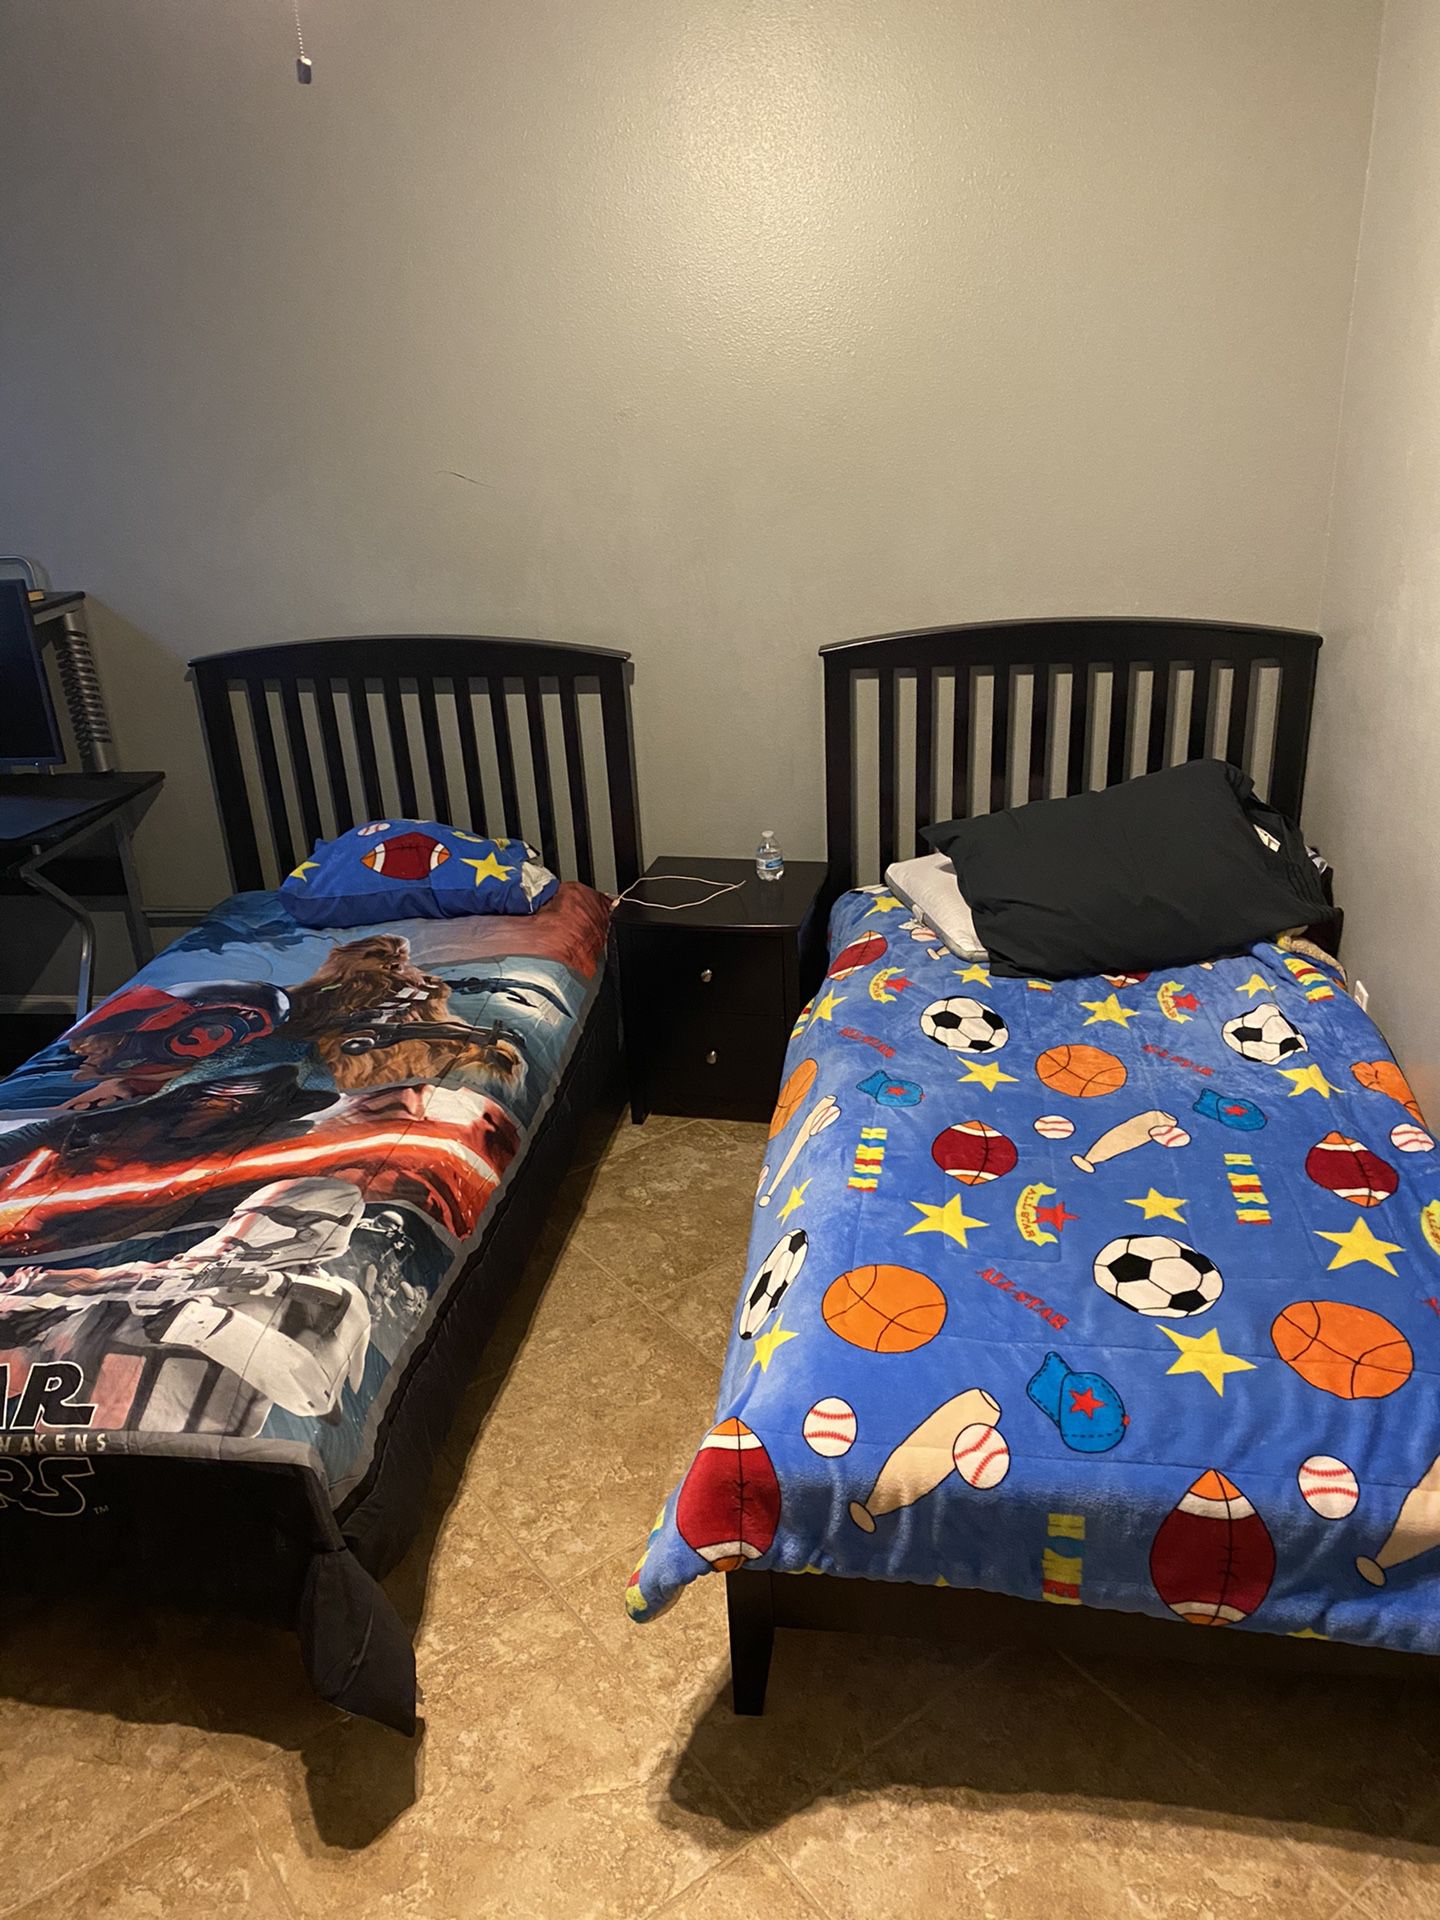 Twin beds with mattress and comforters